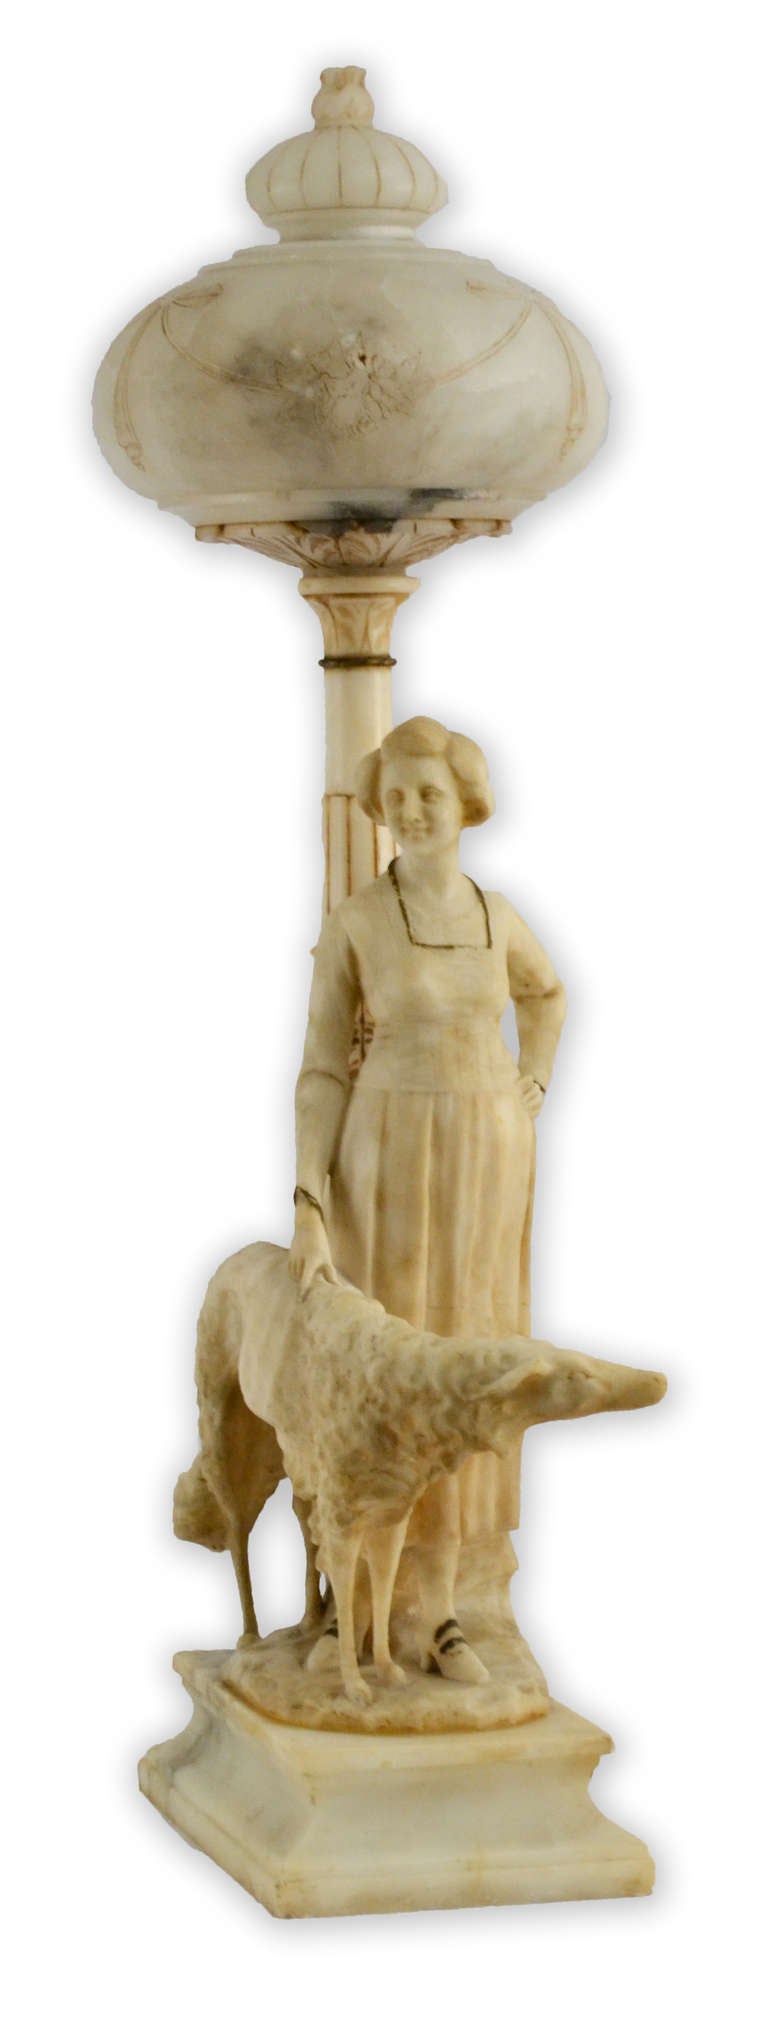 A finely carved Italian lamp in alabaster, featuring a beautiful woman and her dog standing beneath an elaborate street lamp, decorated in carved and incised flowers and garlands.